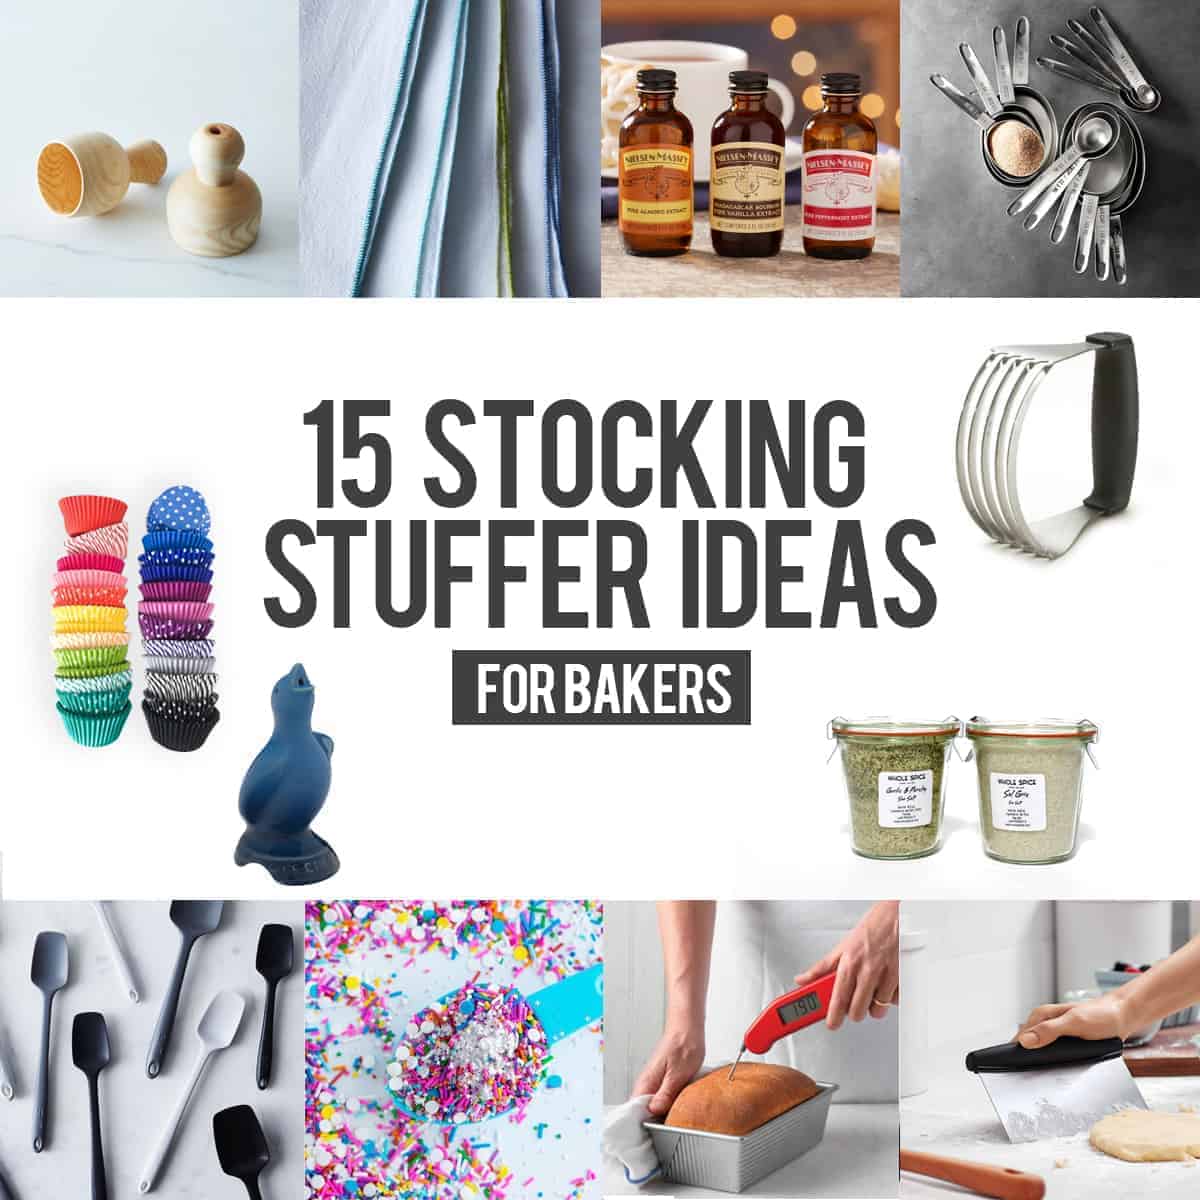 10 Inexpensive Stocking Stuffers for Home Cooks